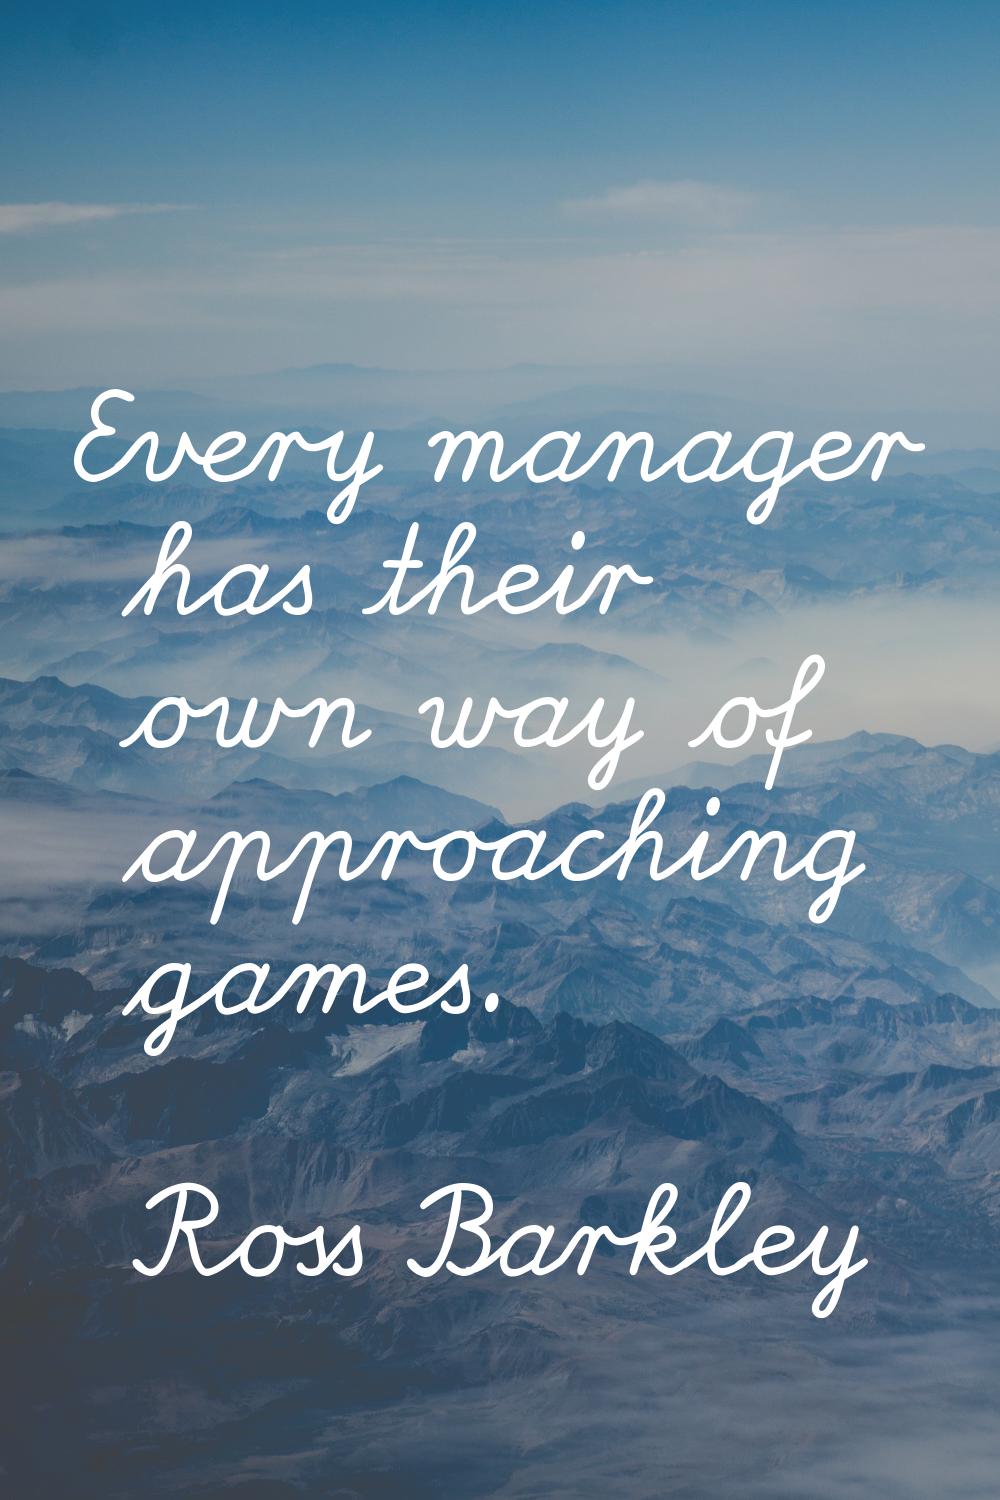 Every manager has their own way of approaching games.